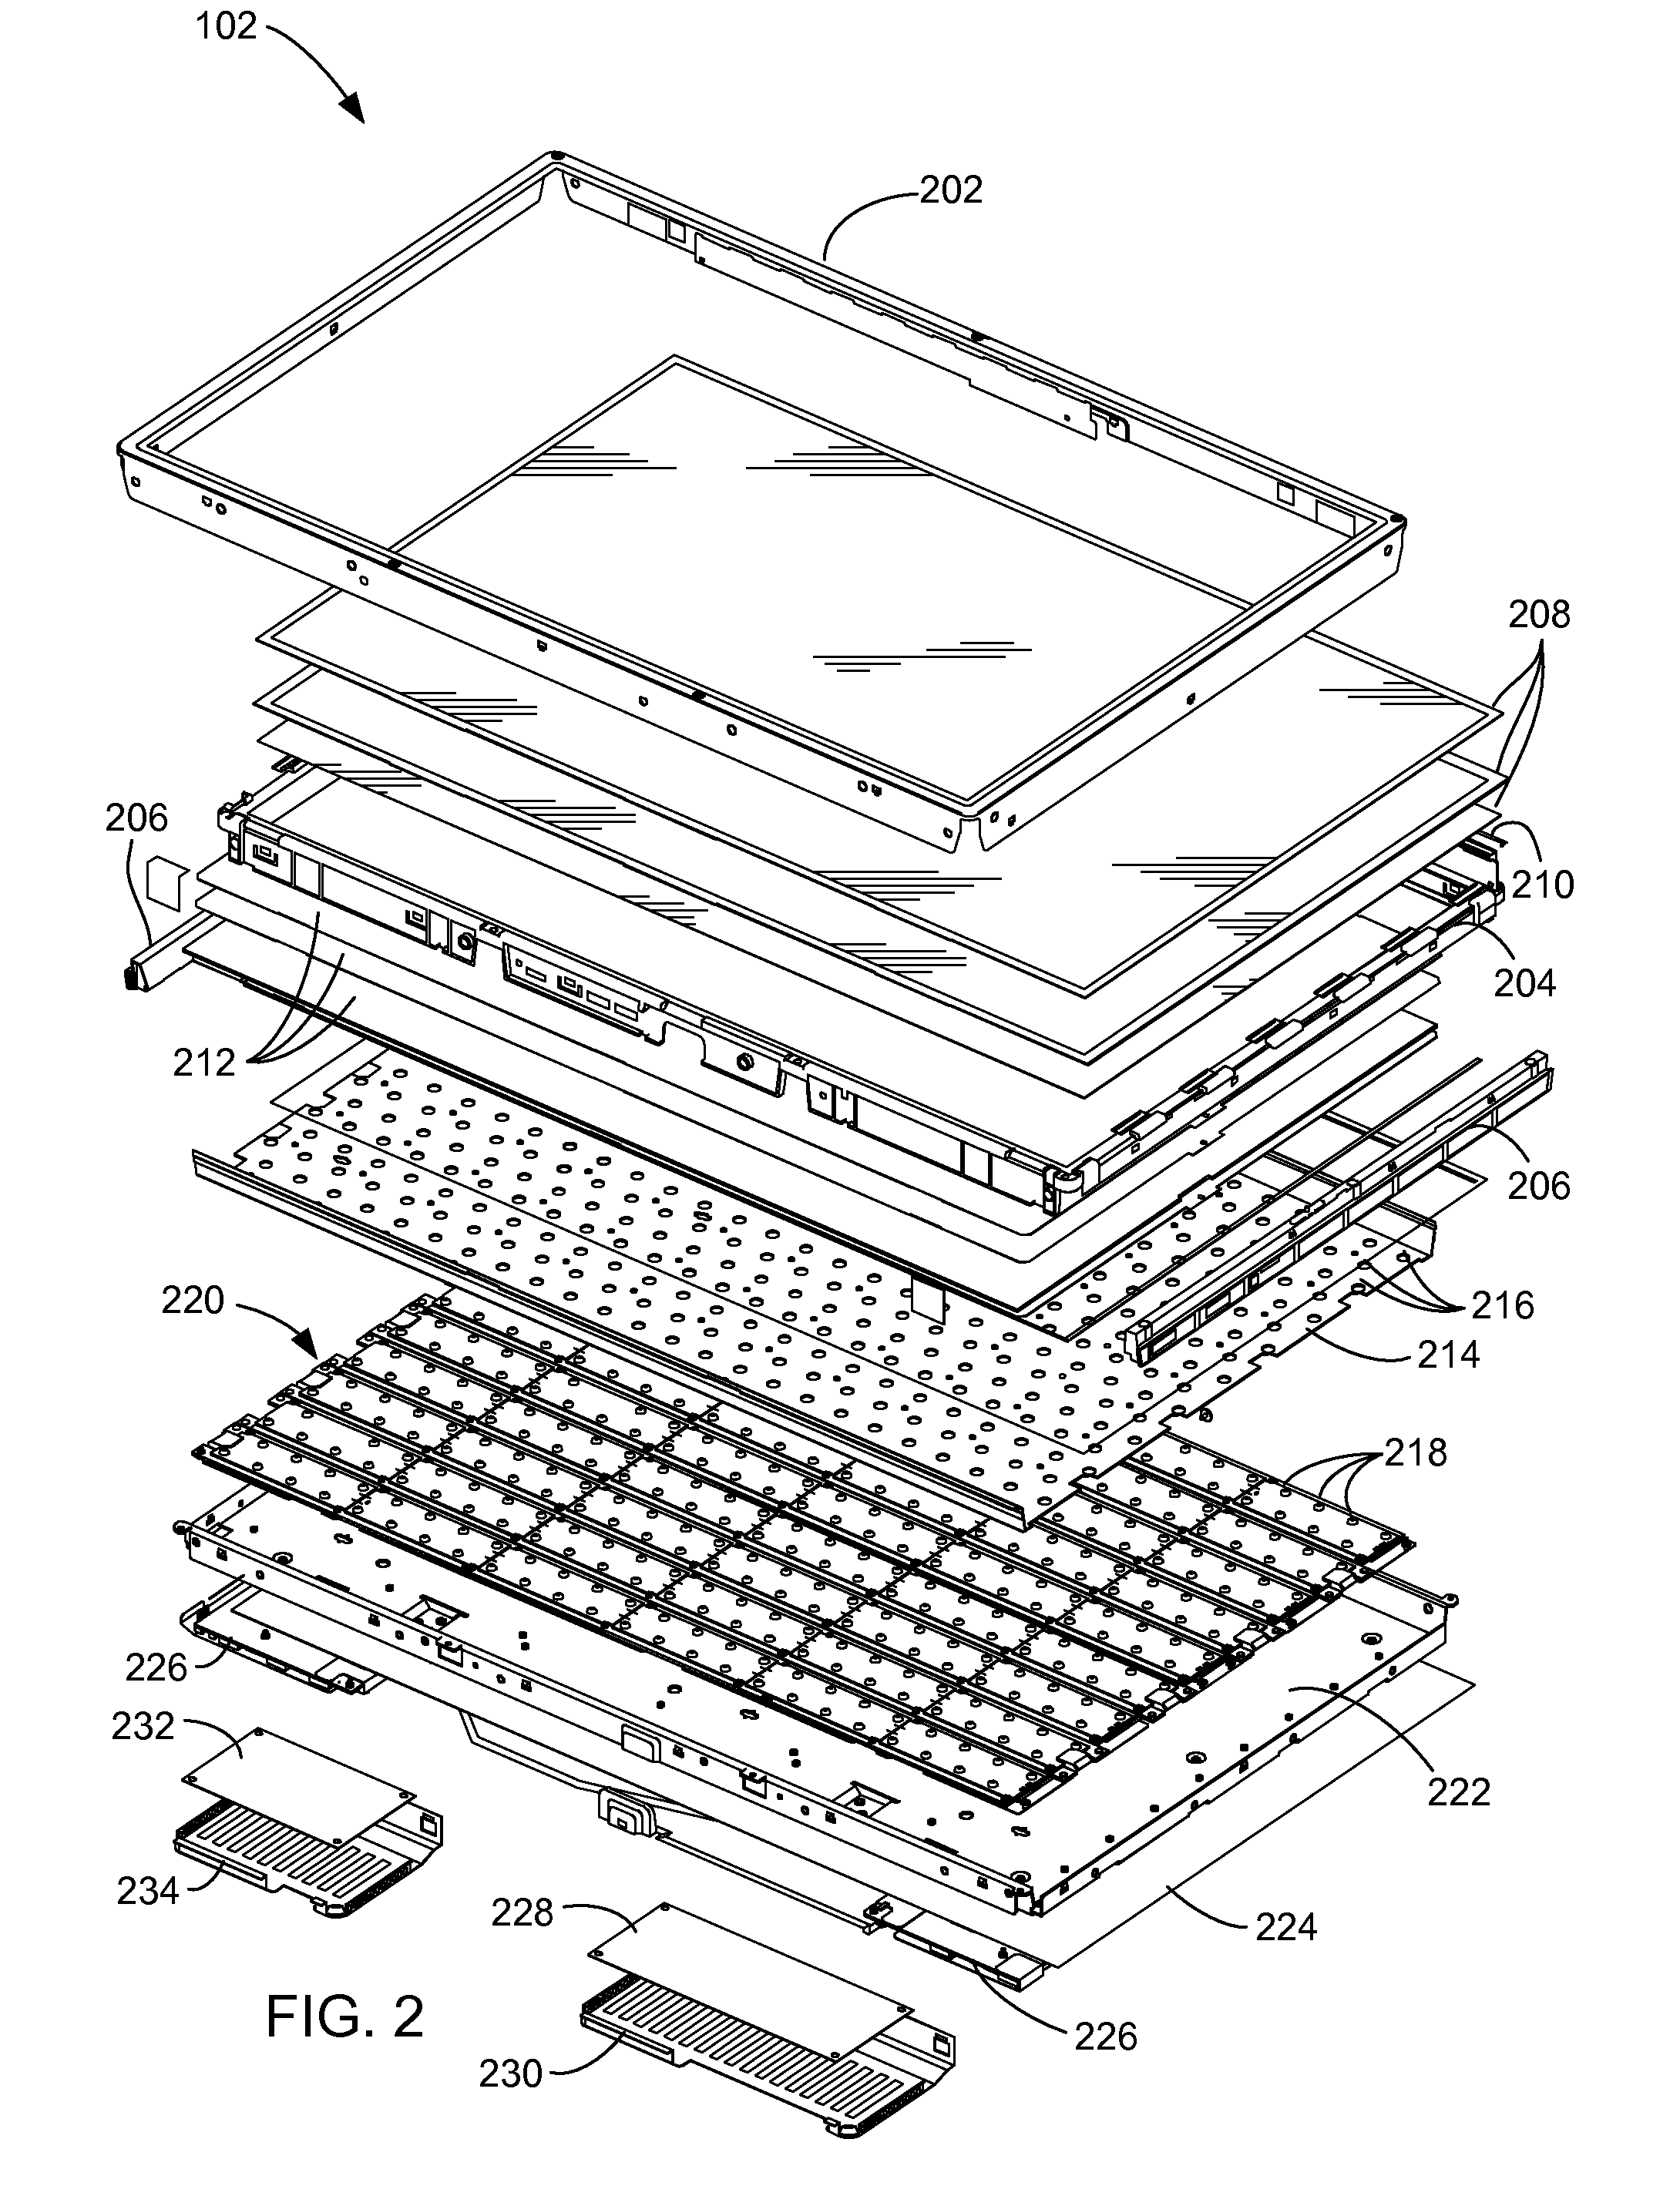 Display device calibration system